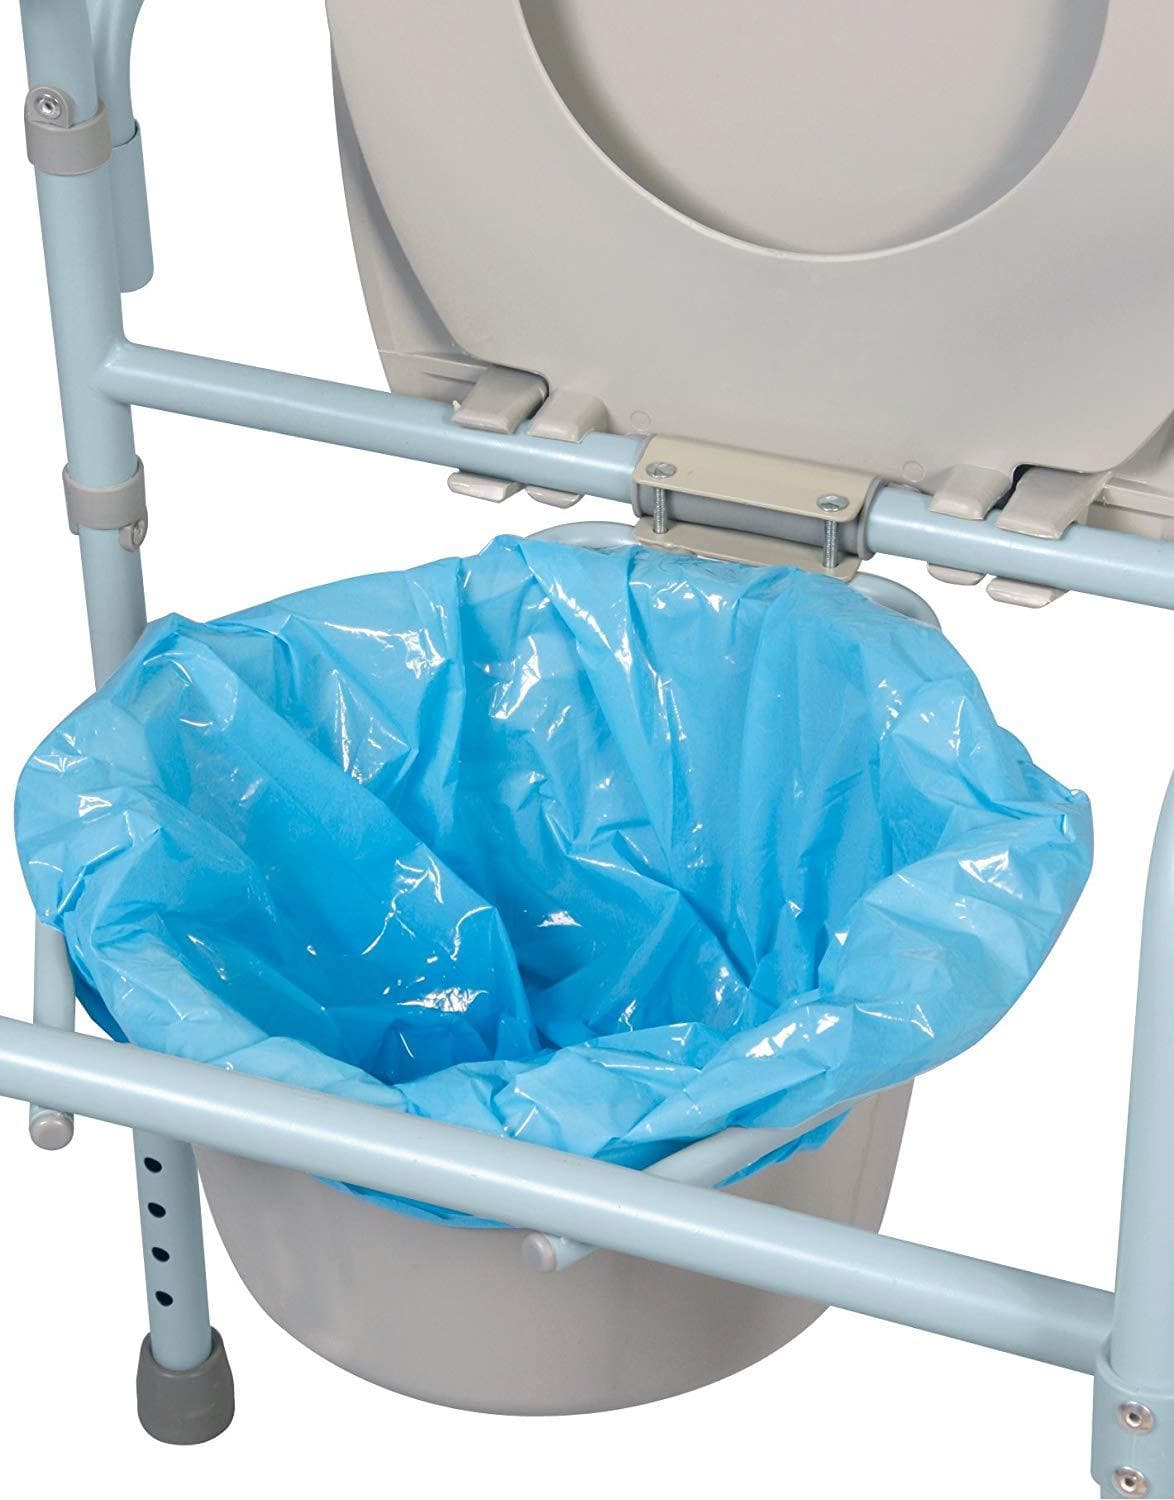 Carex Disposable Commode Liners With Absorbent Powder - 7 Per Box - Senior.com Commode Liners